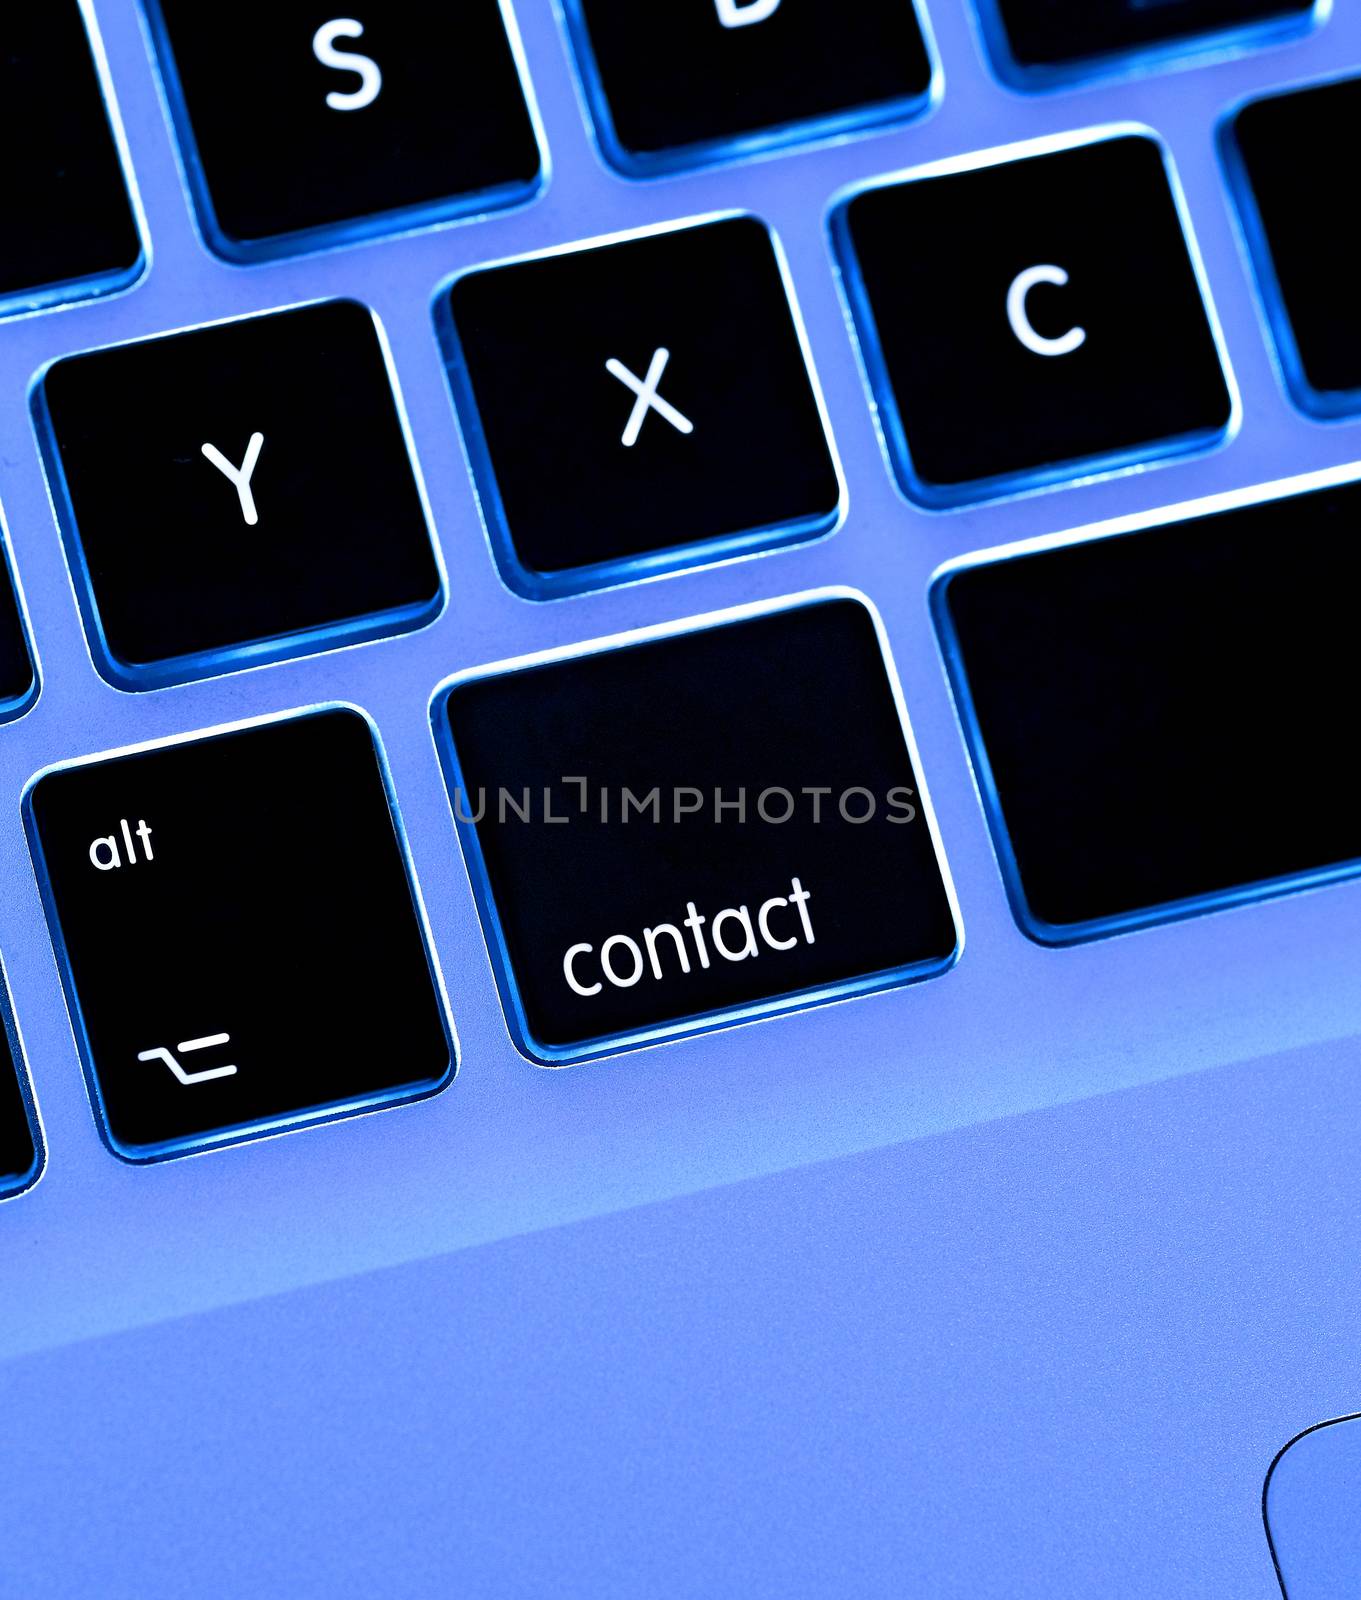 keyboard layout with contact / mail key / button {super high resolution/shot with PhaseOne P45}